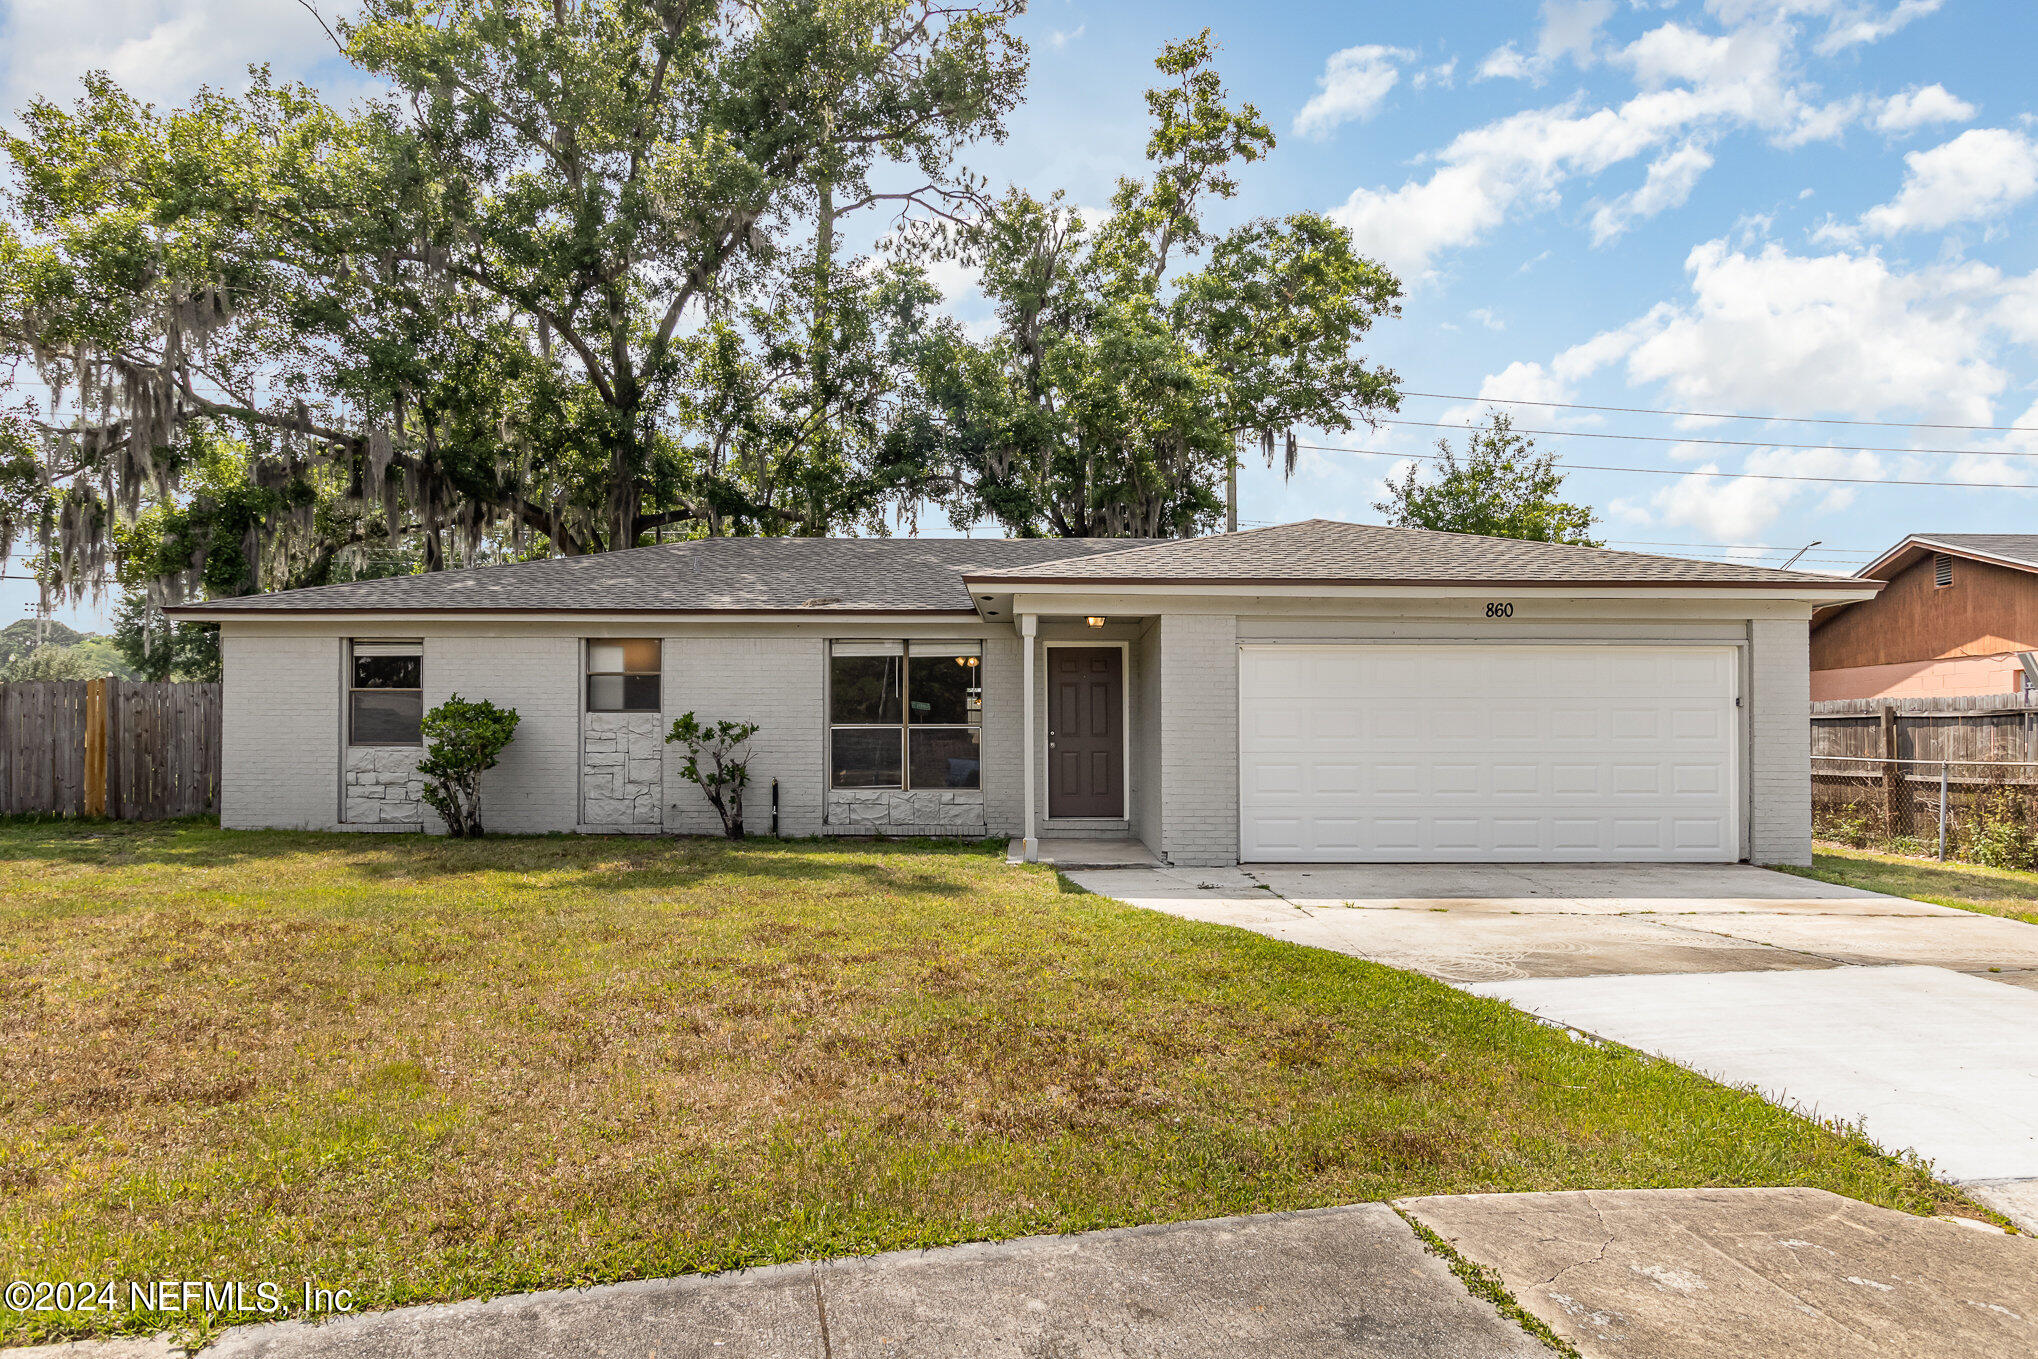 Jacksonville, FL home for sale located at 860 W Trambley Drive, Jacksonville, FL 32221